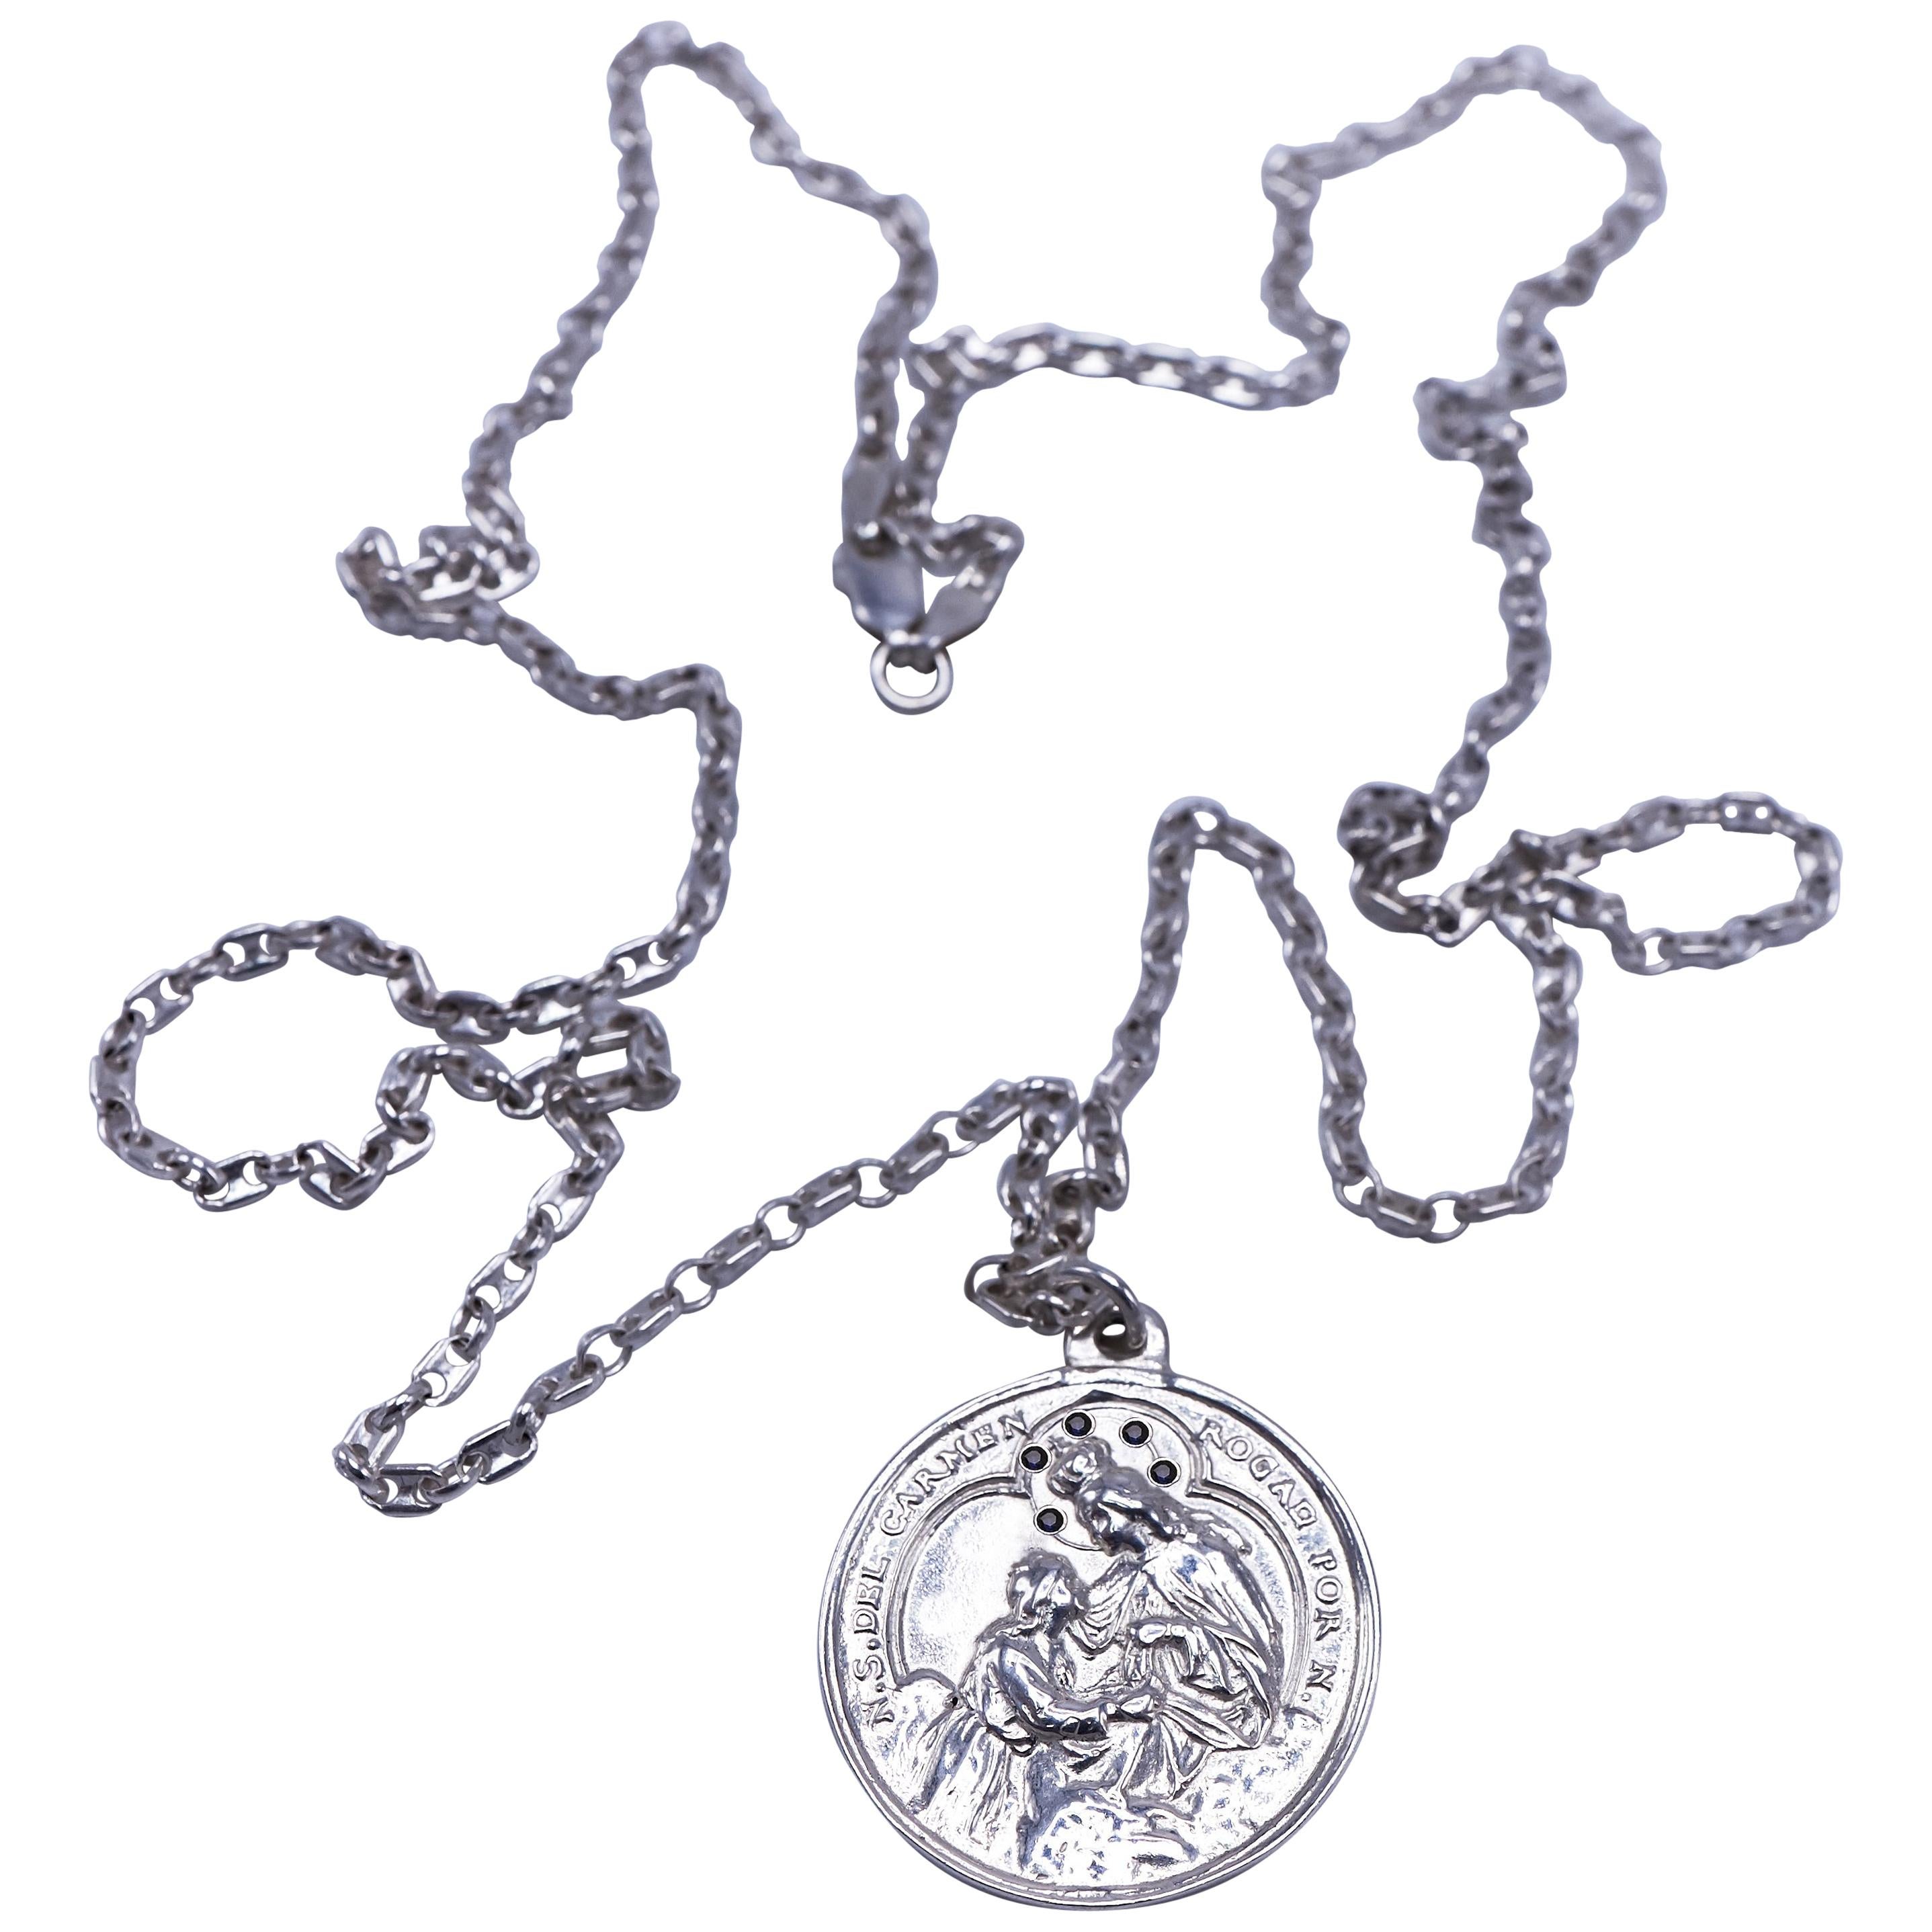 Medal Chain Necklace Miraculous Virgin Mary Black Diamond Silver J Dauphin

J DAUPHIN necklace 